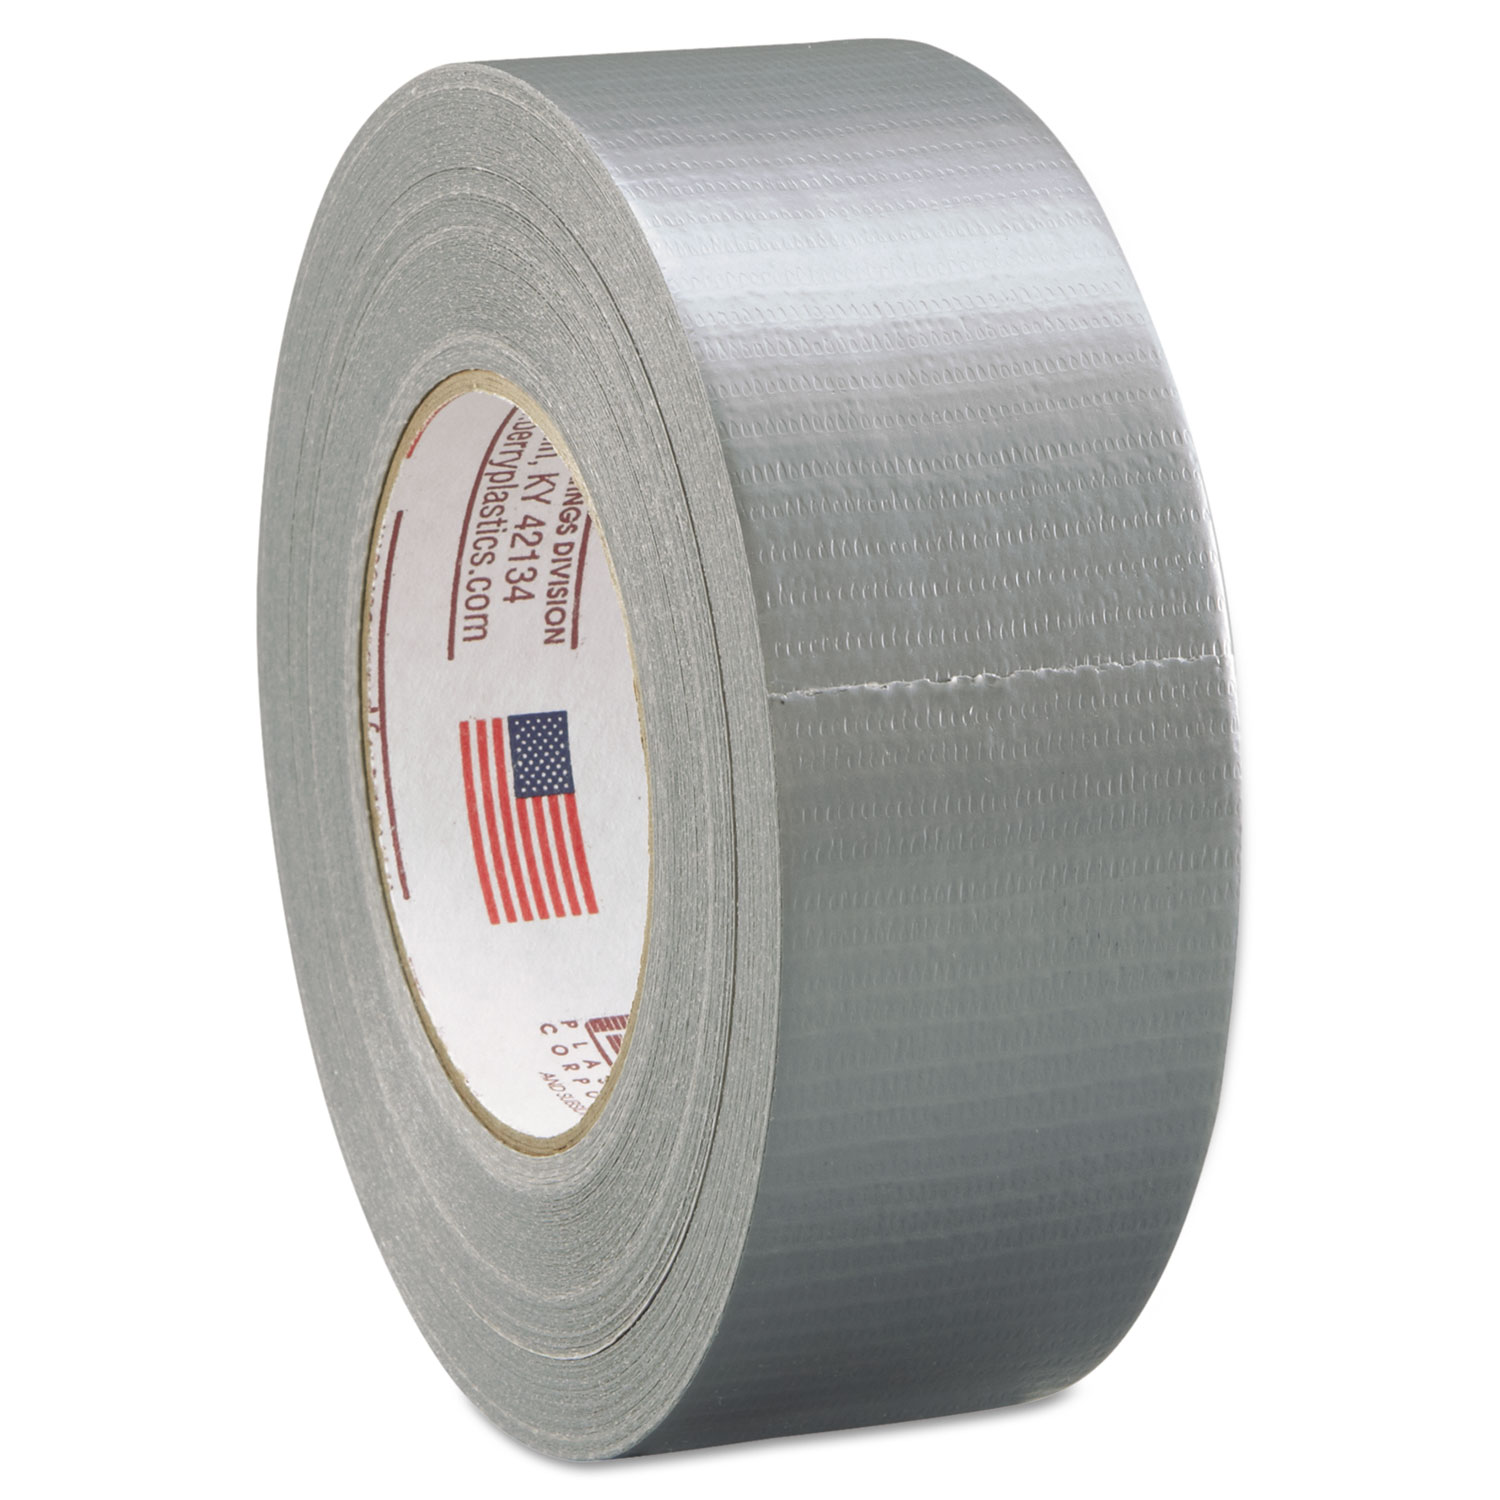 394-2-SIL Premium, Duct Tape, 2 x 60yds, Silver